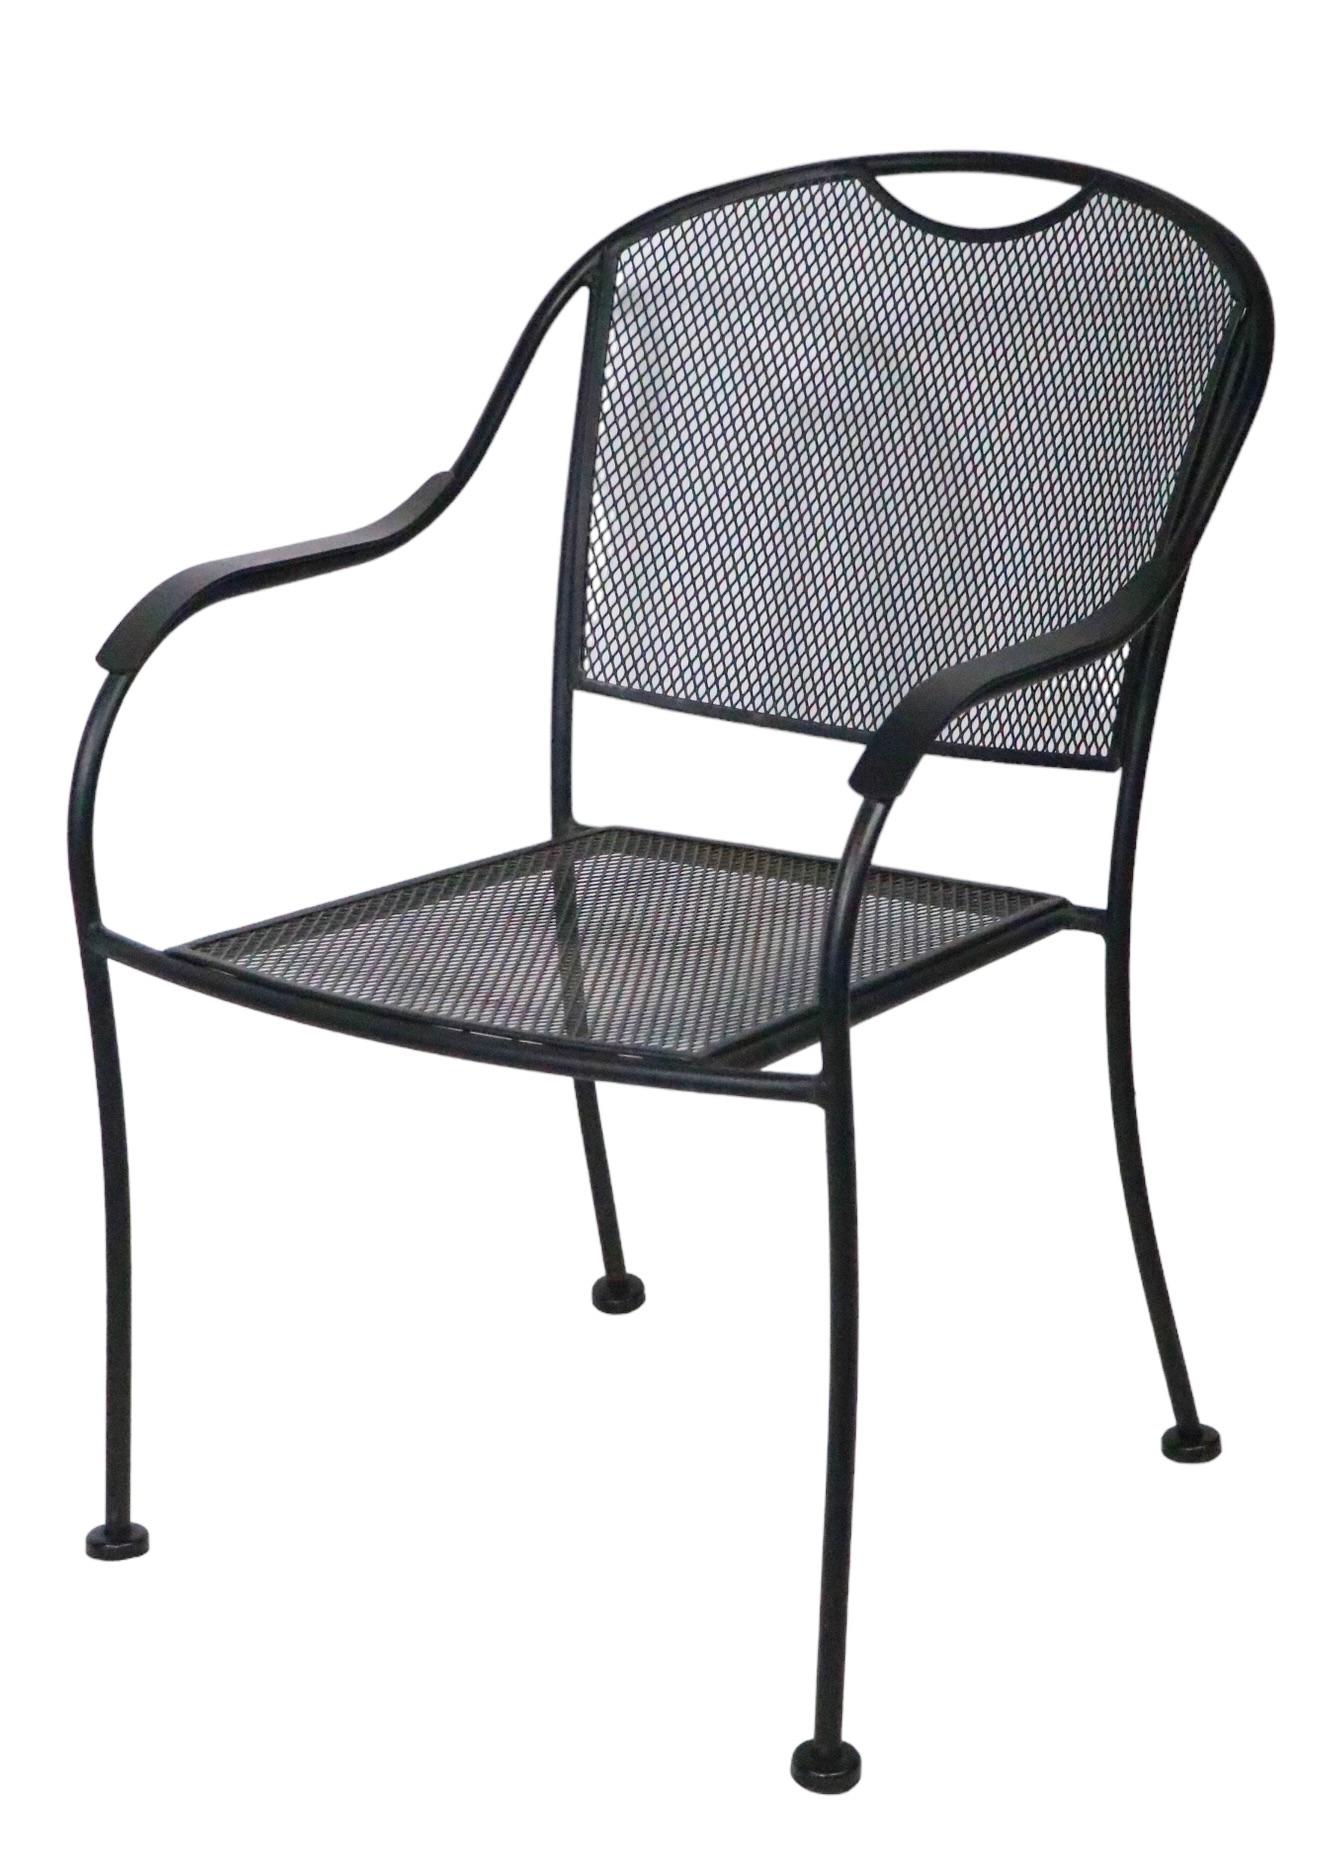 Set of Four Modernist Metal Garden Patio Dining Chairs in the style of Woodard For Sale 2